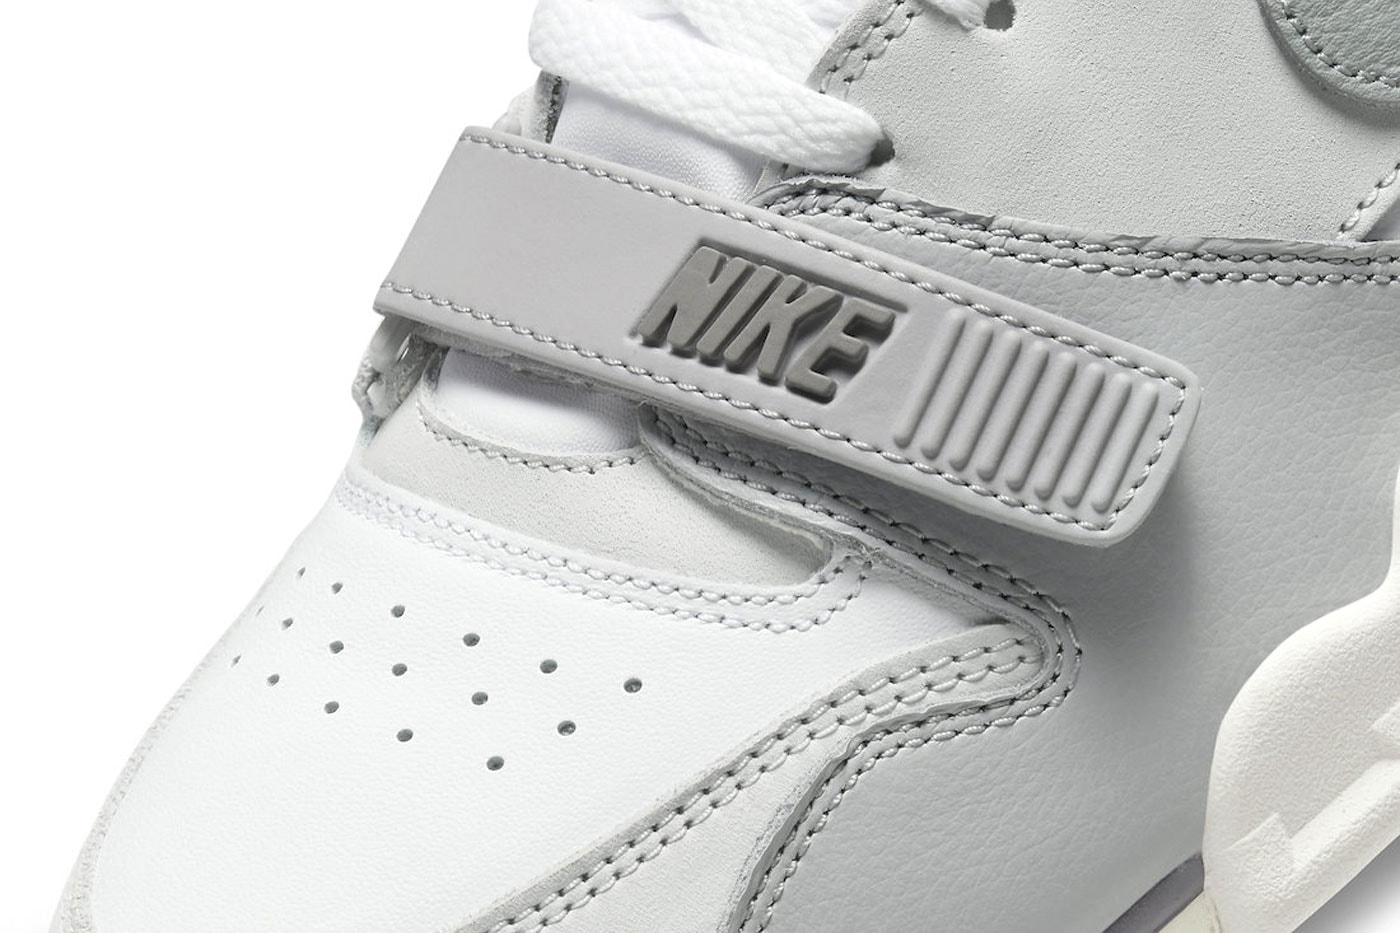 Take an Official Look at the Nike Air Trainer 1 "Photon Dust" DM0521-001 light smoke grey smoke grey 